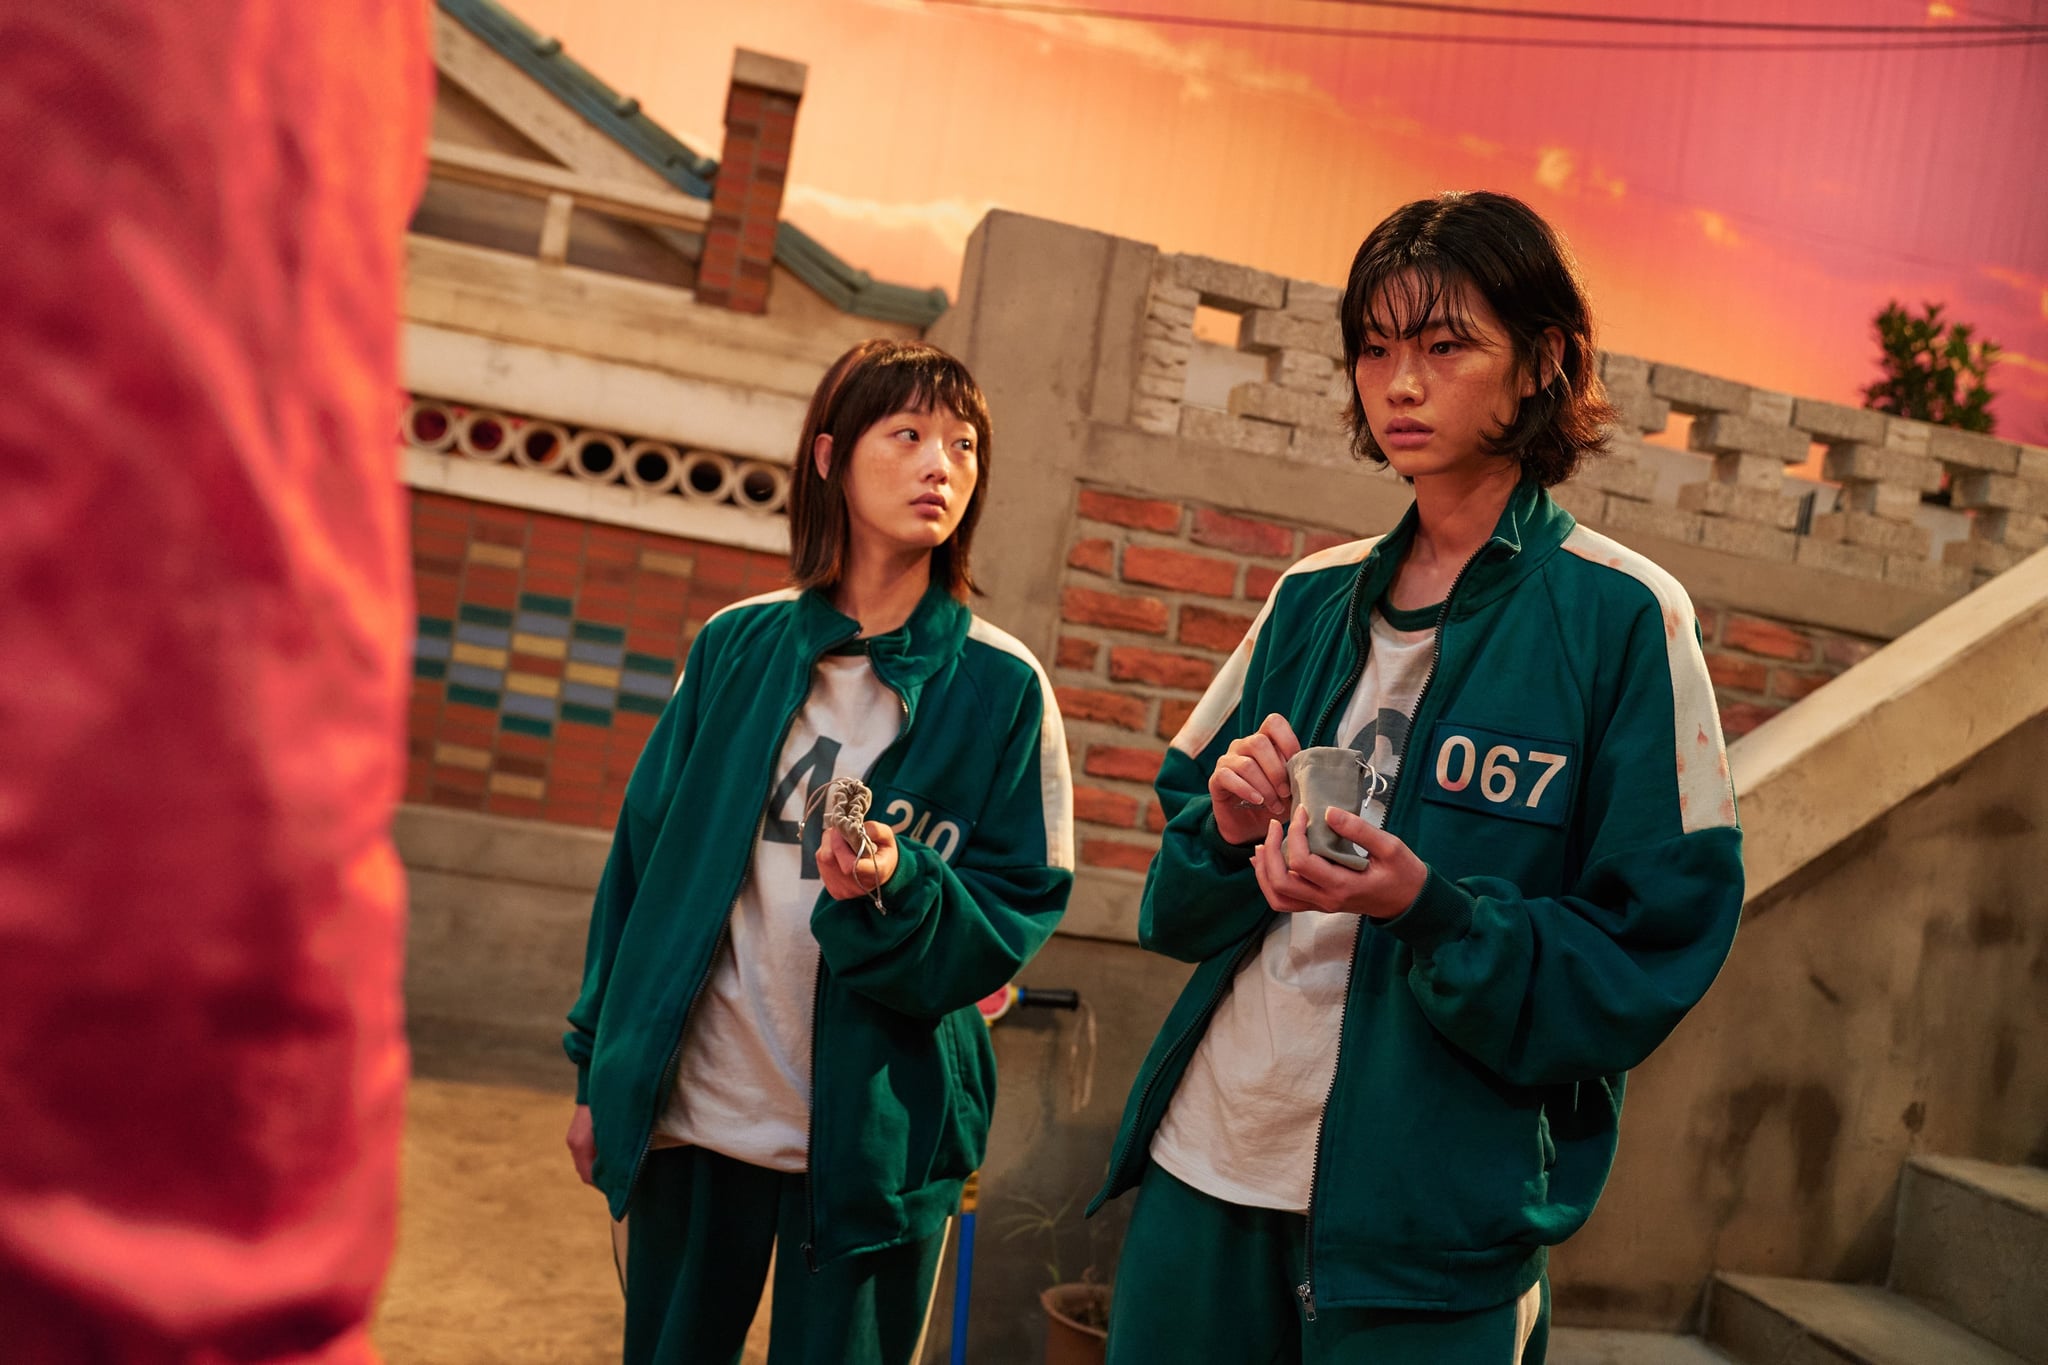 SQUID GAME, from left: LEE yoo-mi, JUNG Ho-yeon, Gganbu', (Season 1, ep. 106, aired in the US on Sept. 17, 2021). photo: Noh Juhan / Netflix / Courtesy Everett Collection